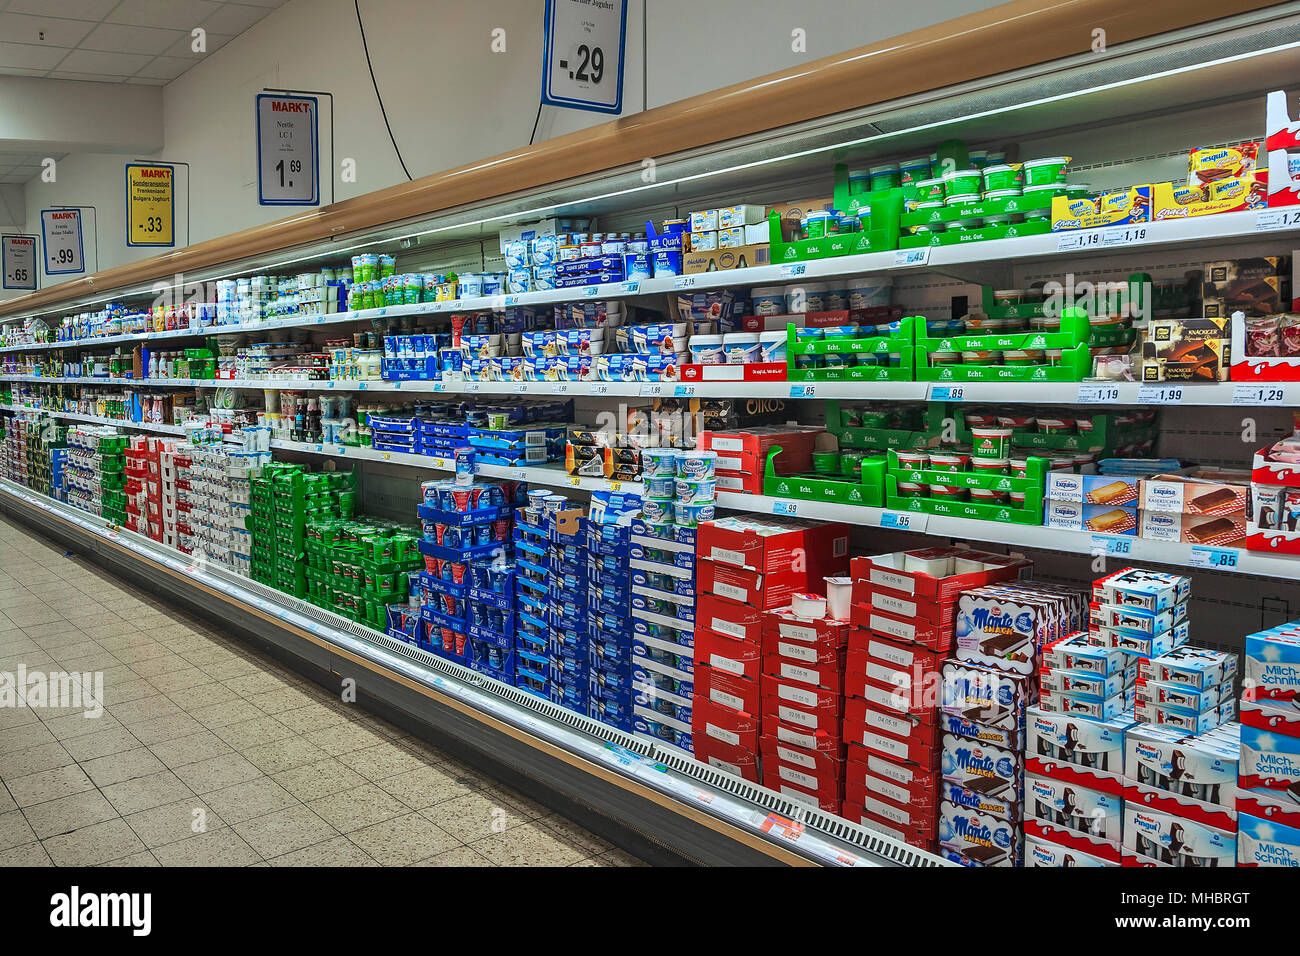 Shelf with dairy products in supermarkets, Munich, Upper Bavaria, Bavaria, Germany Stock Photo